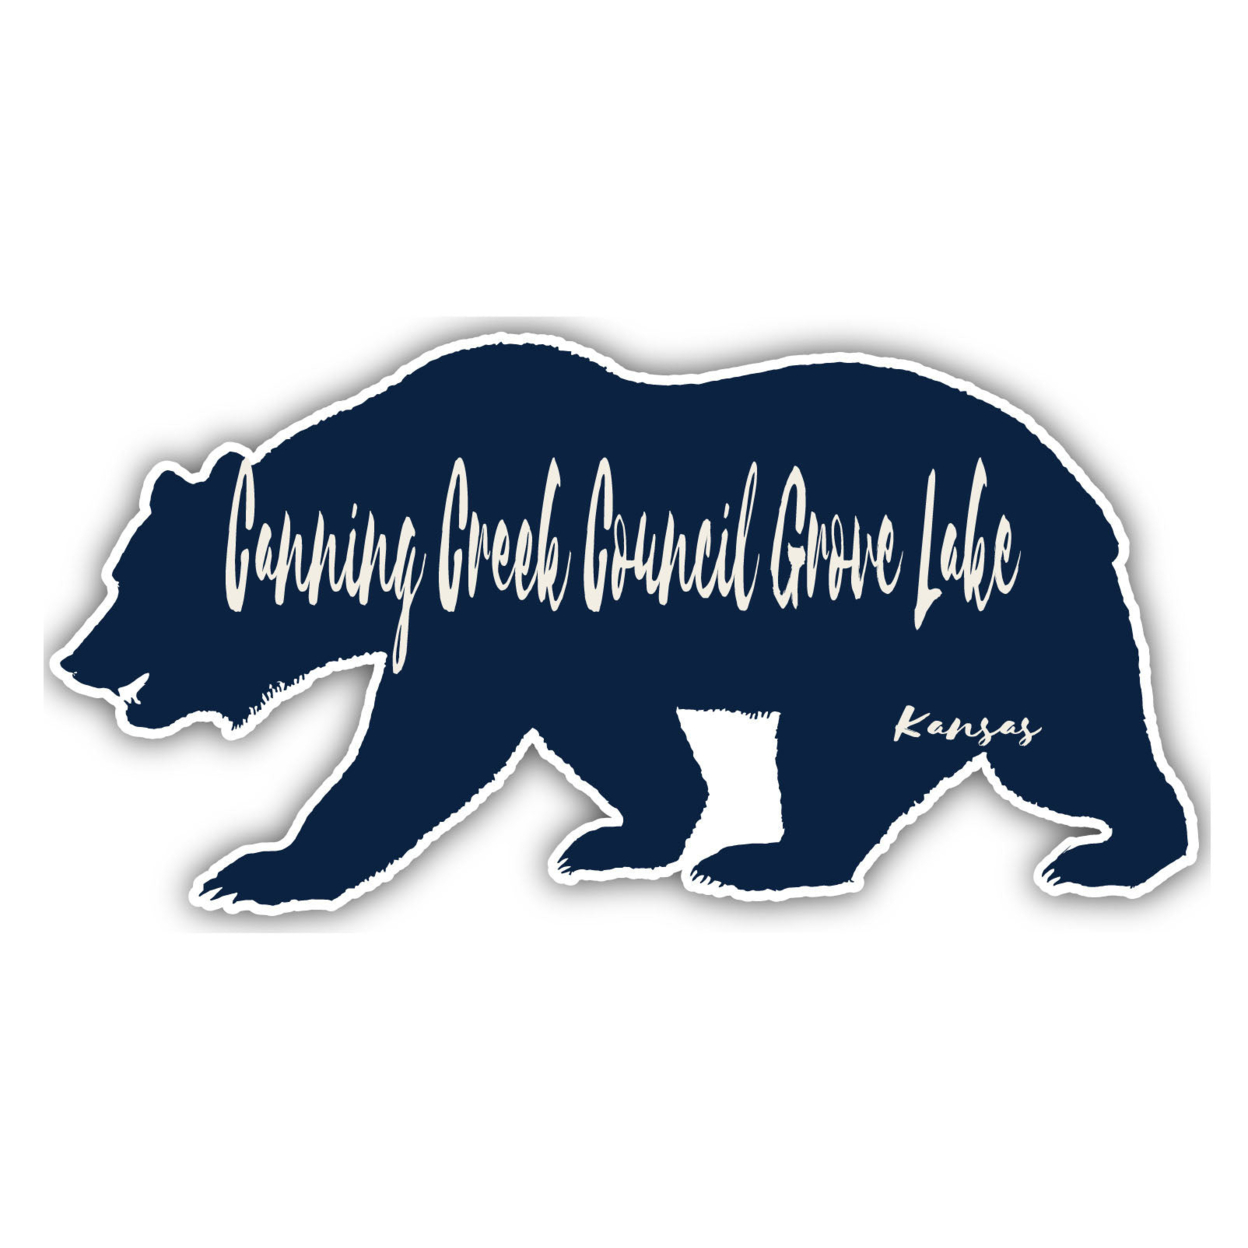 Canning Creek Council Grove Lake Kansas Souvenir Decorative Stickers (Choose Theme And Size) - 4-Pack, 6-Inch, Bear